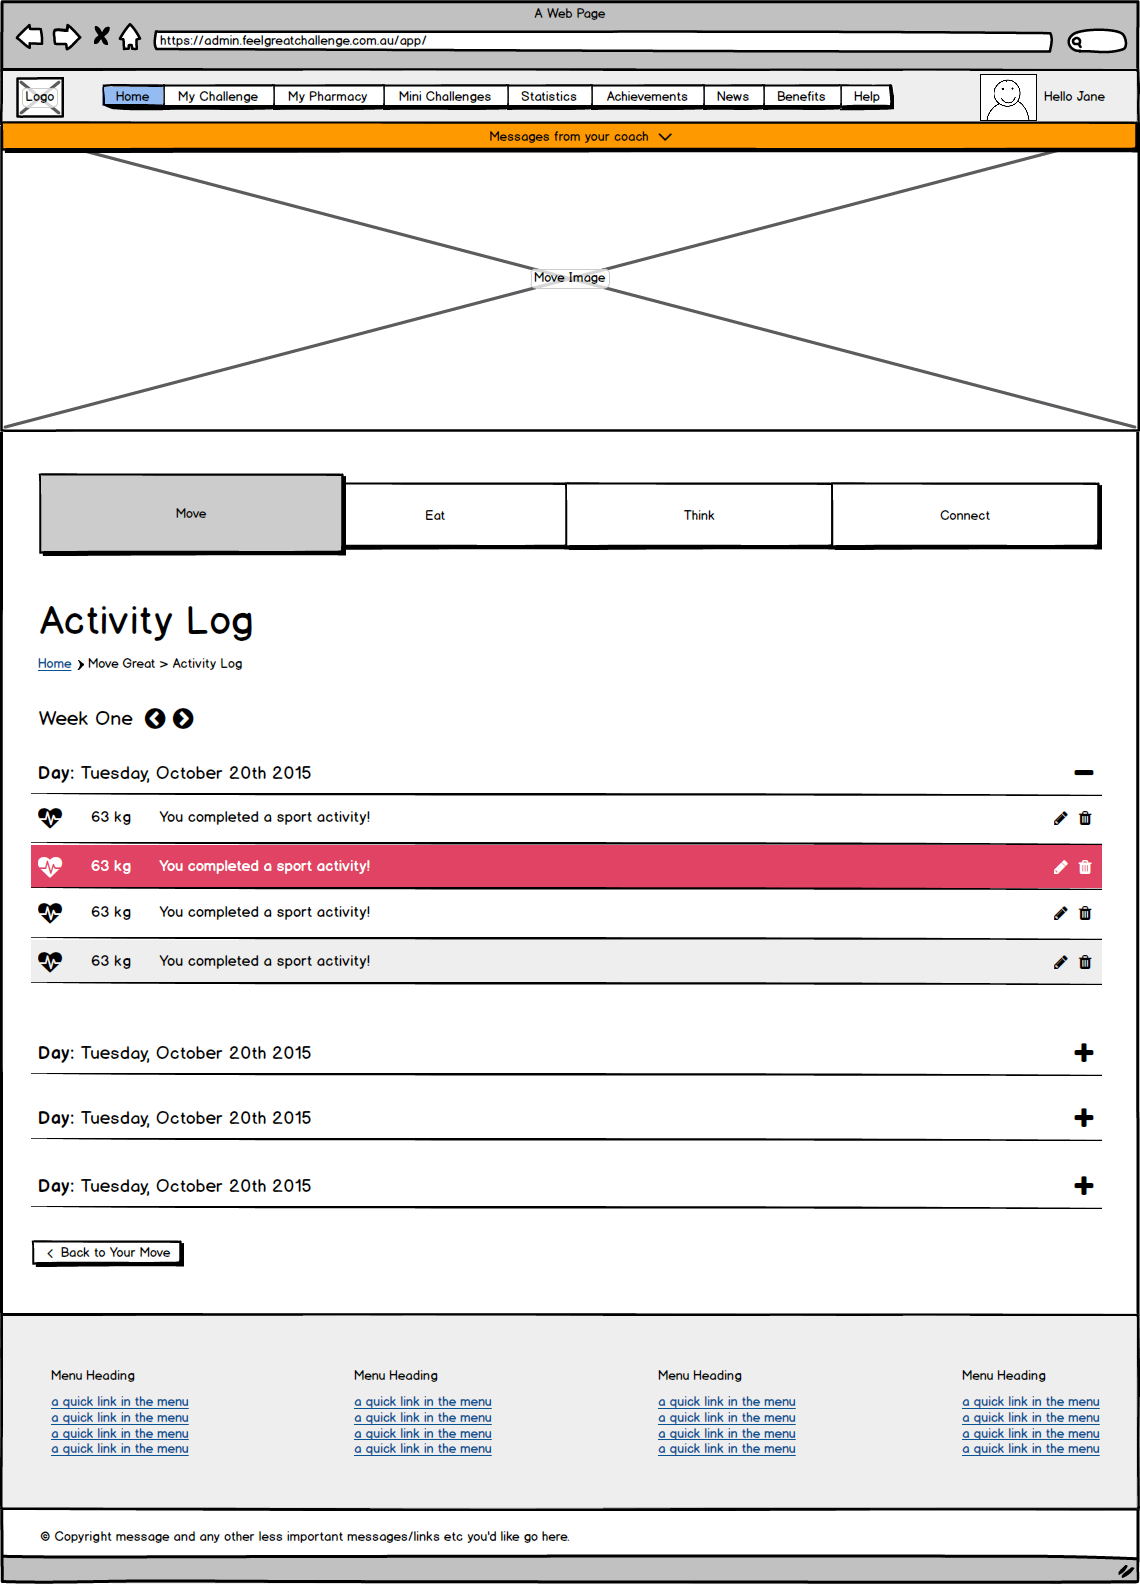 Activity log view in Move Great section.